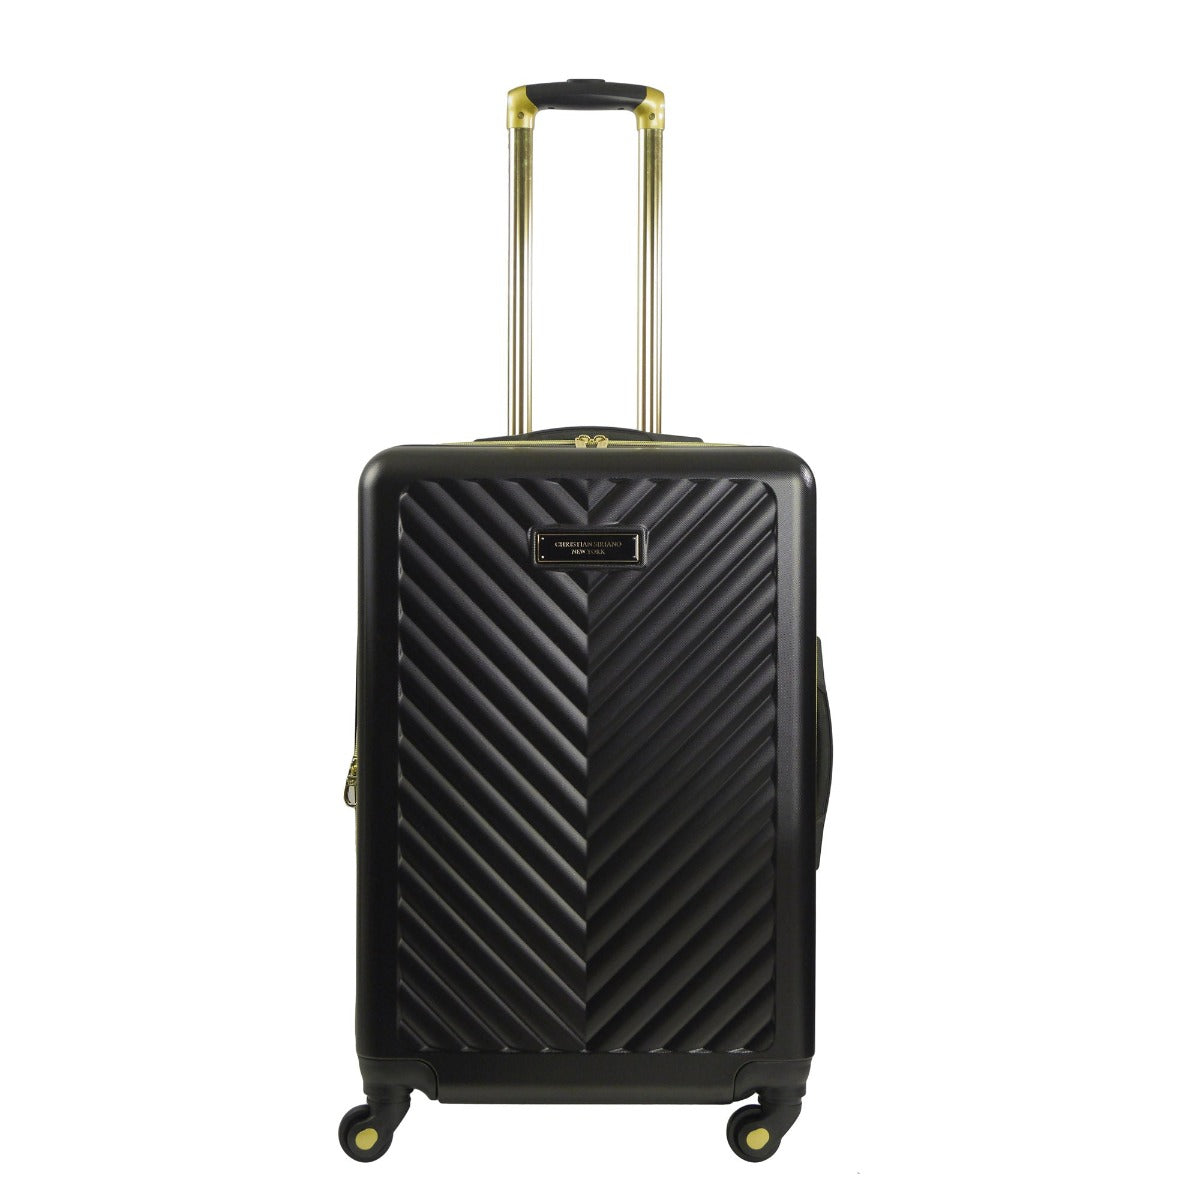 Christian Siriano Addie 25" hardside spinner suitcase checked luggage black - best durable suitcases for travel